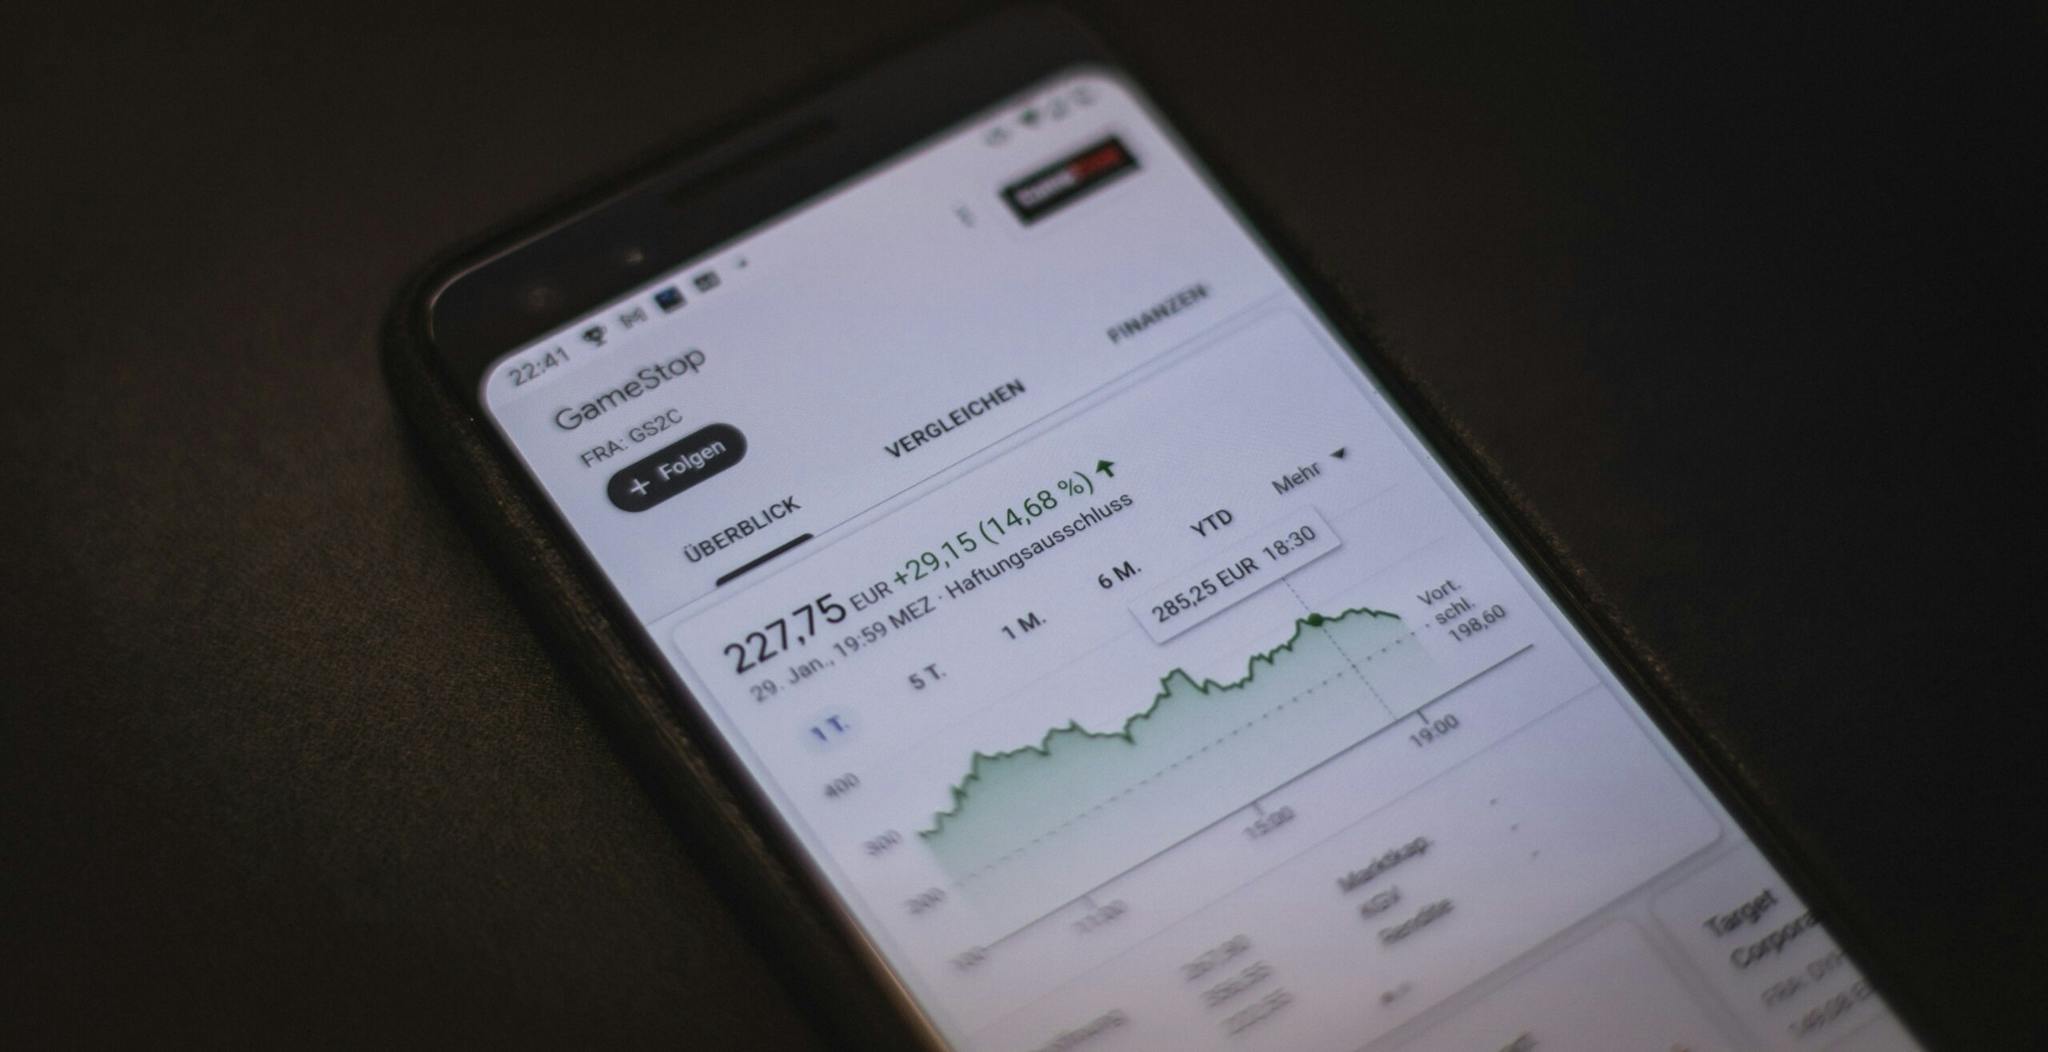 A step-by-step guide on investing in stocks using your smartphone, simplifying the process for beginners.